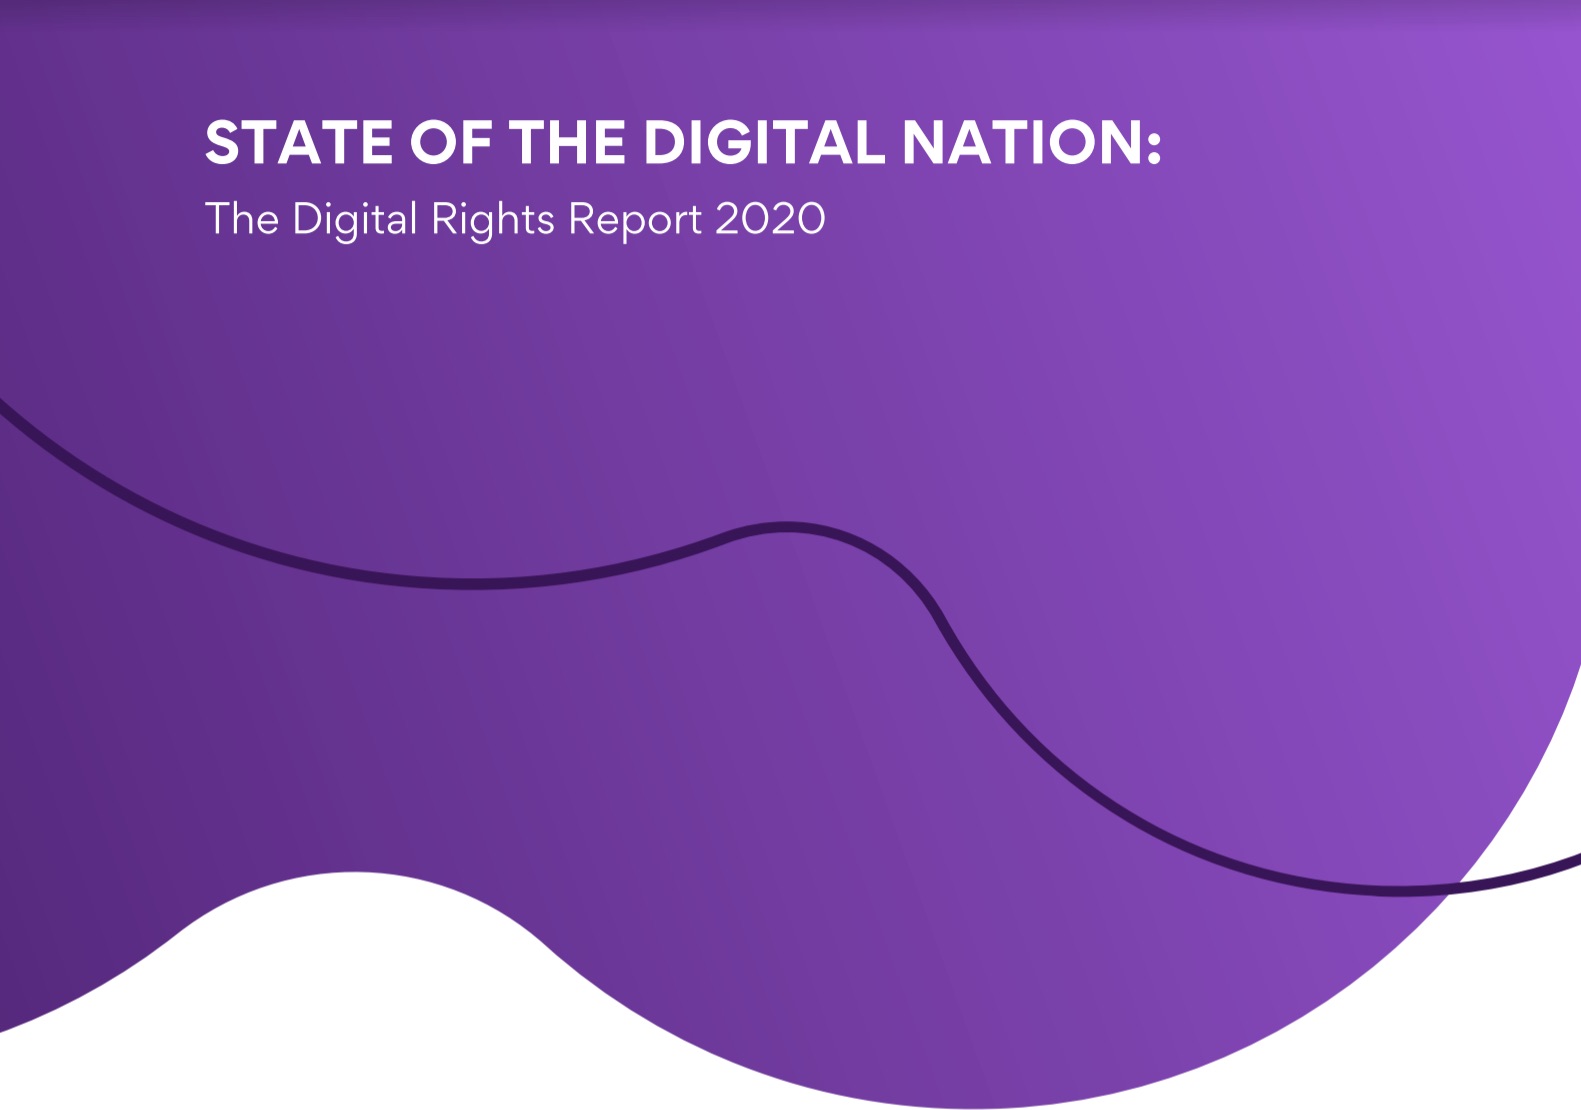 State of the Digital Nation: The Digital Rights Report 2020